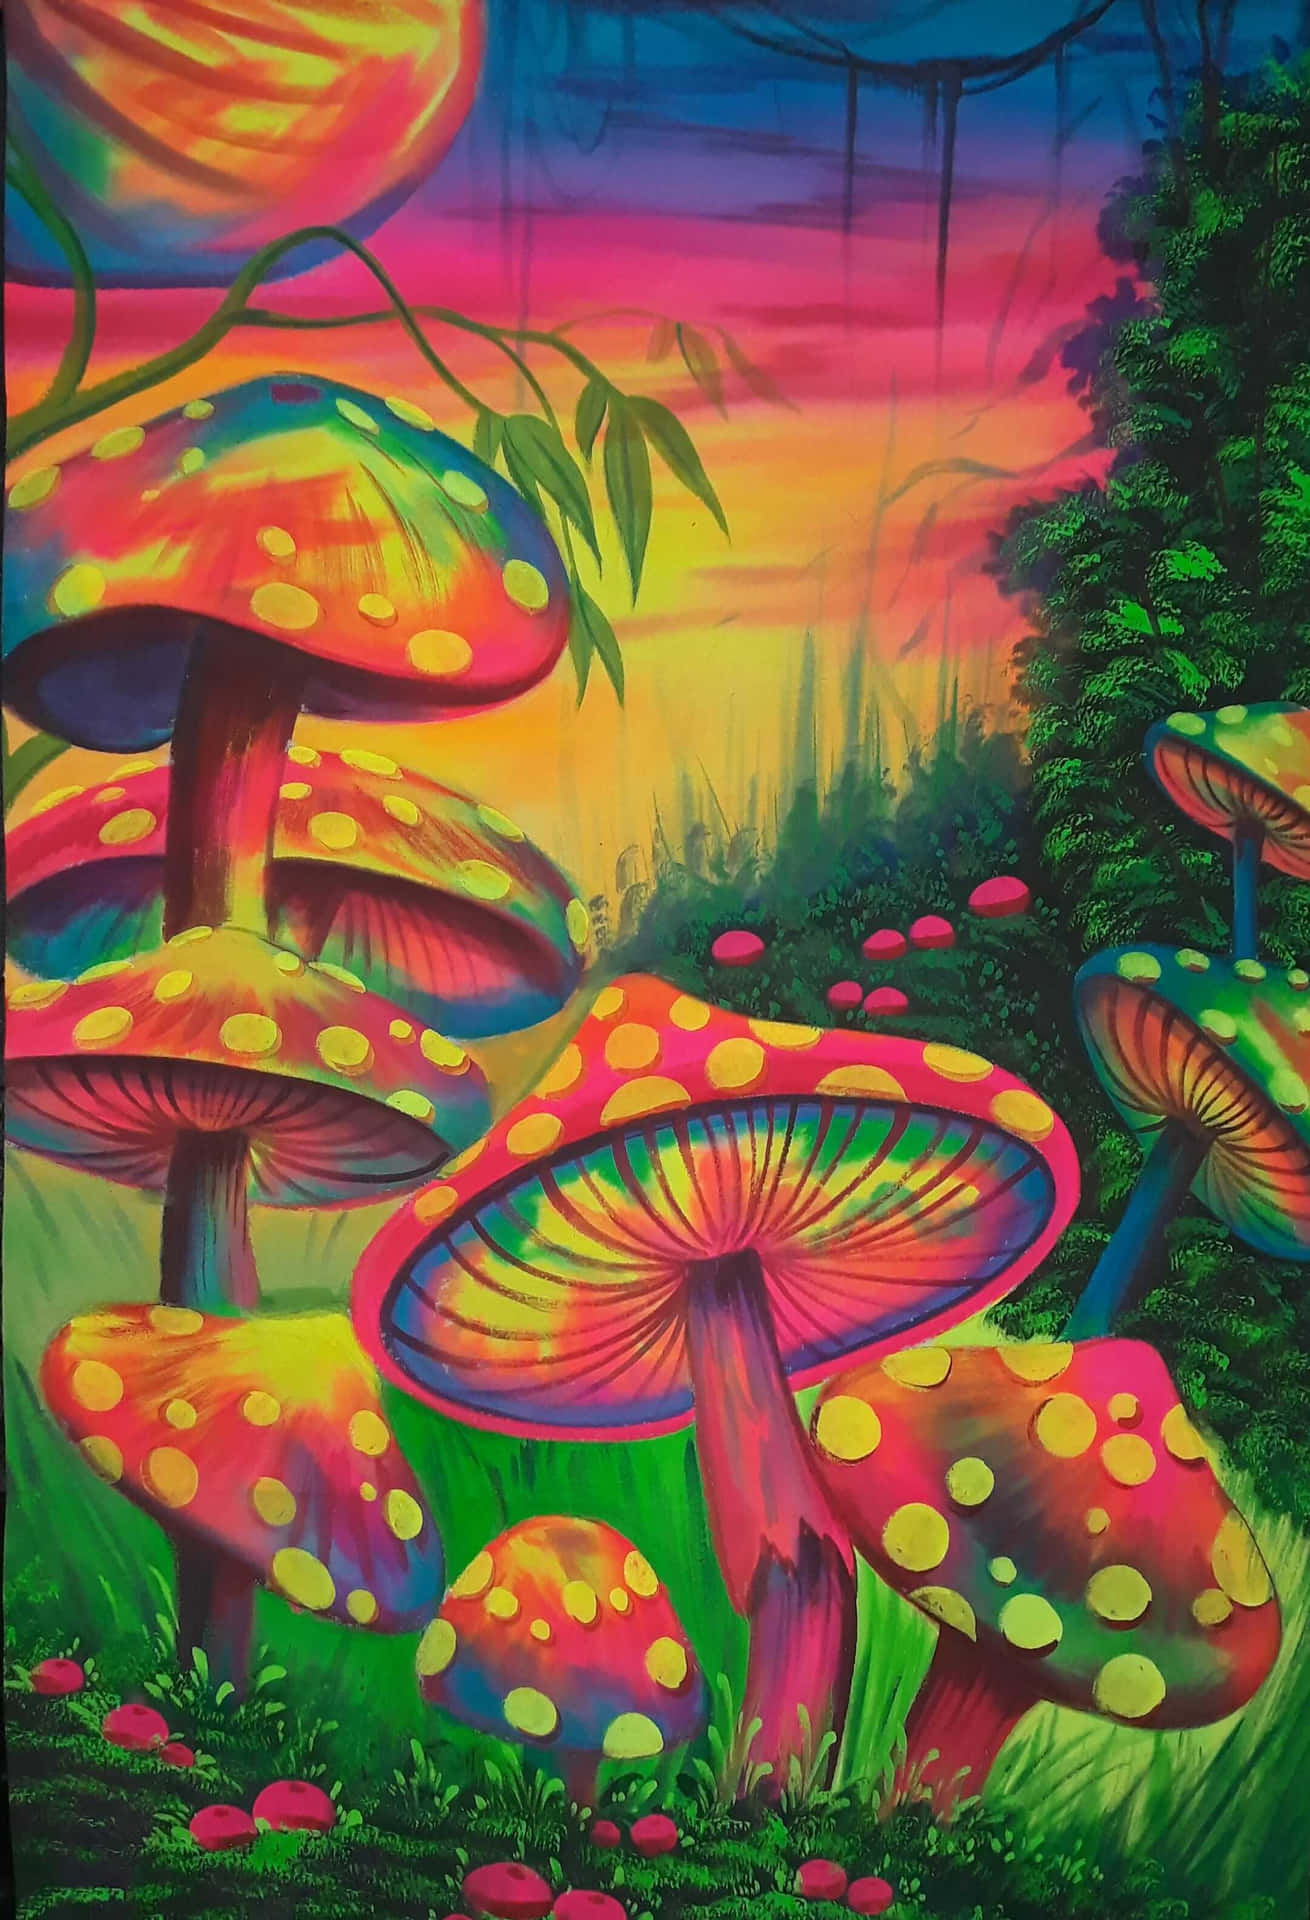 A Colorful Painting Of Mushrooms In The Forest Wallpaper